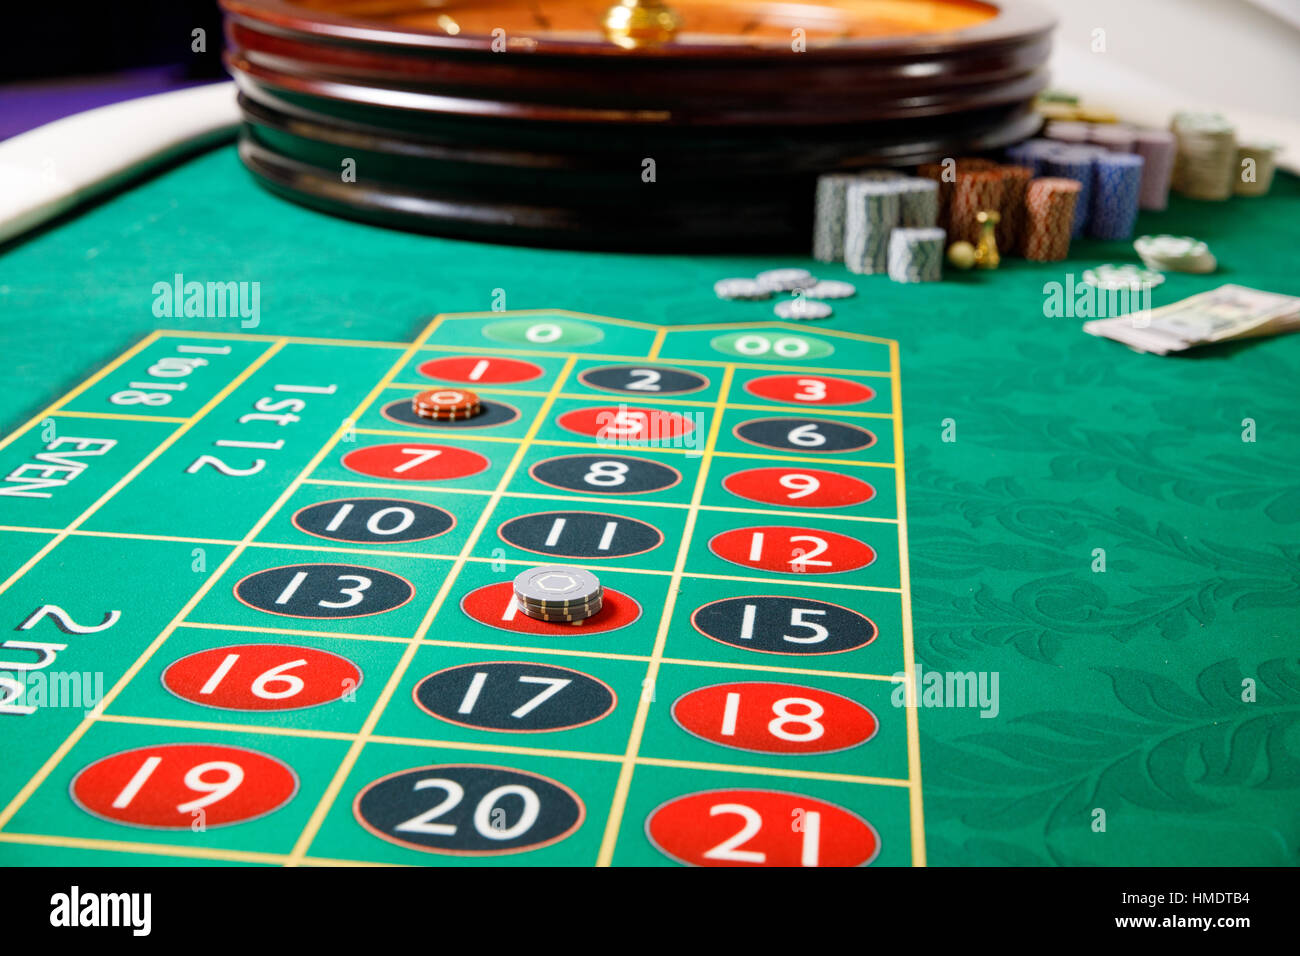 Casino Roulette Wheel With Casino Chips On Green Table. Gambling  Background. 3d Illustration Stock Photo, Picture and Royalty Free Image.  Image 80169656.